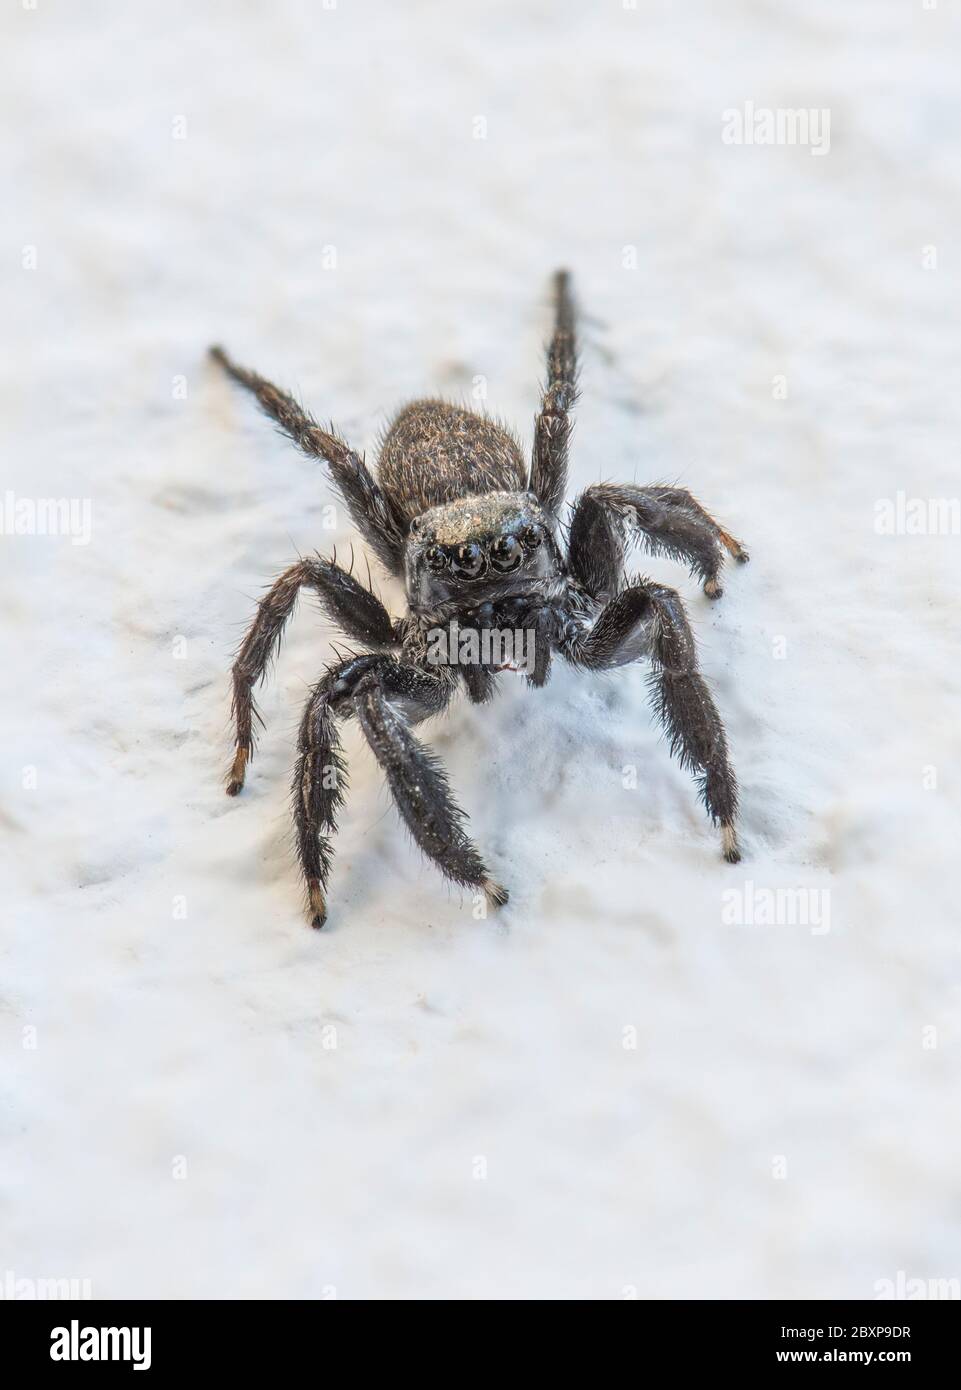 Tiny jumping spider (Salticidae  Sp.) on a white wall Stock Photo